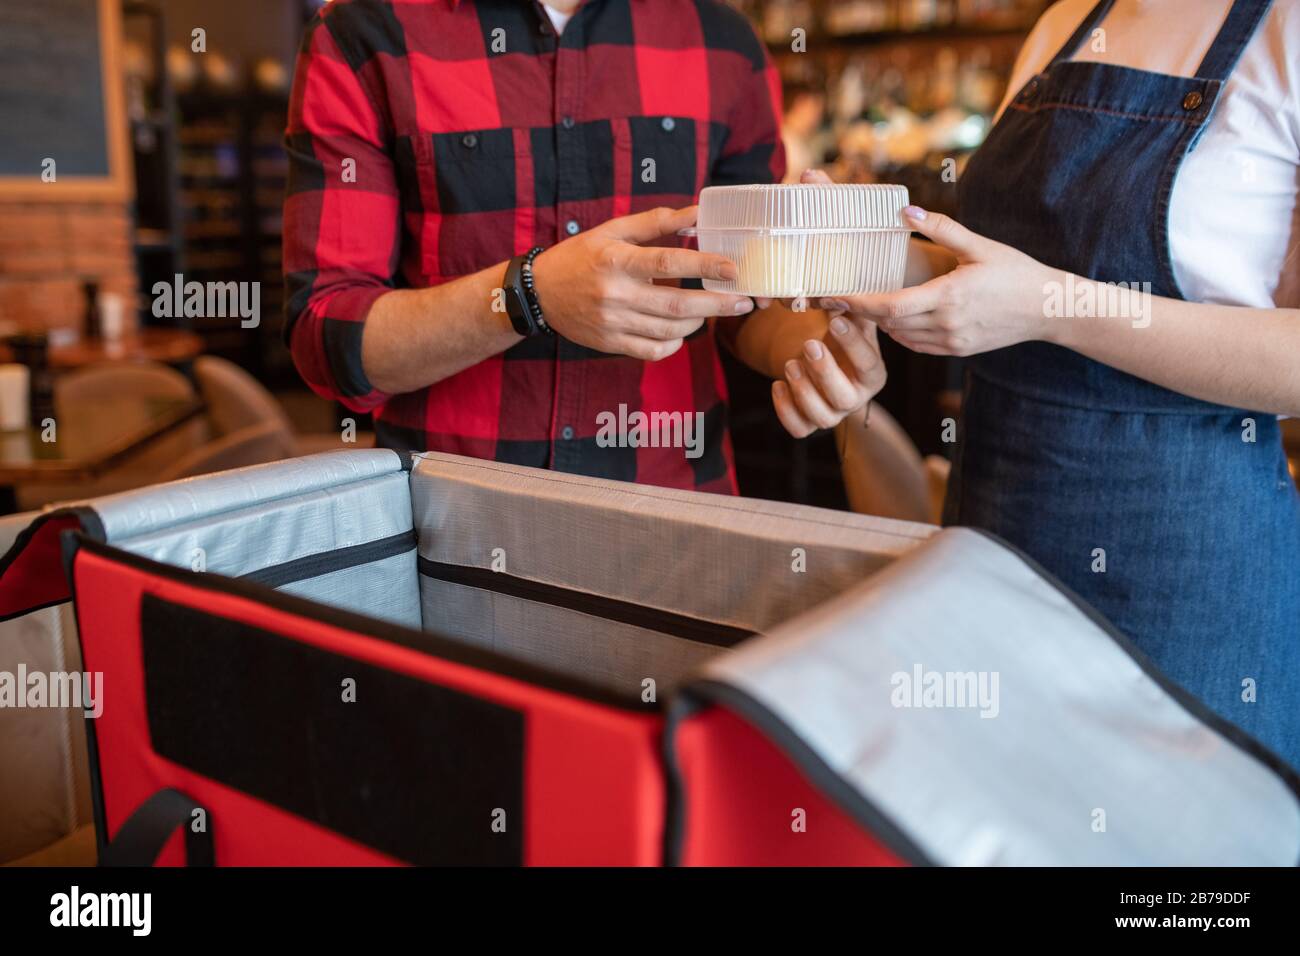 Waiter of cafe passing plastic container with order of client to courier over open big red bag while packing ordered food Stock Photo